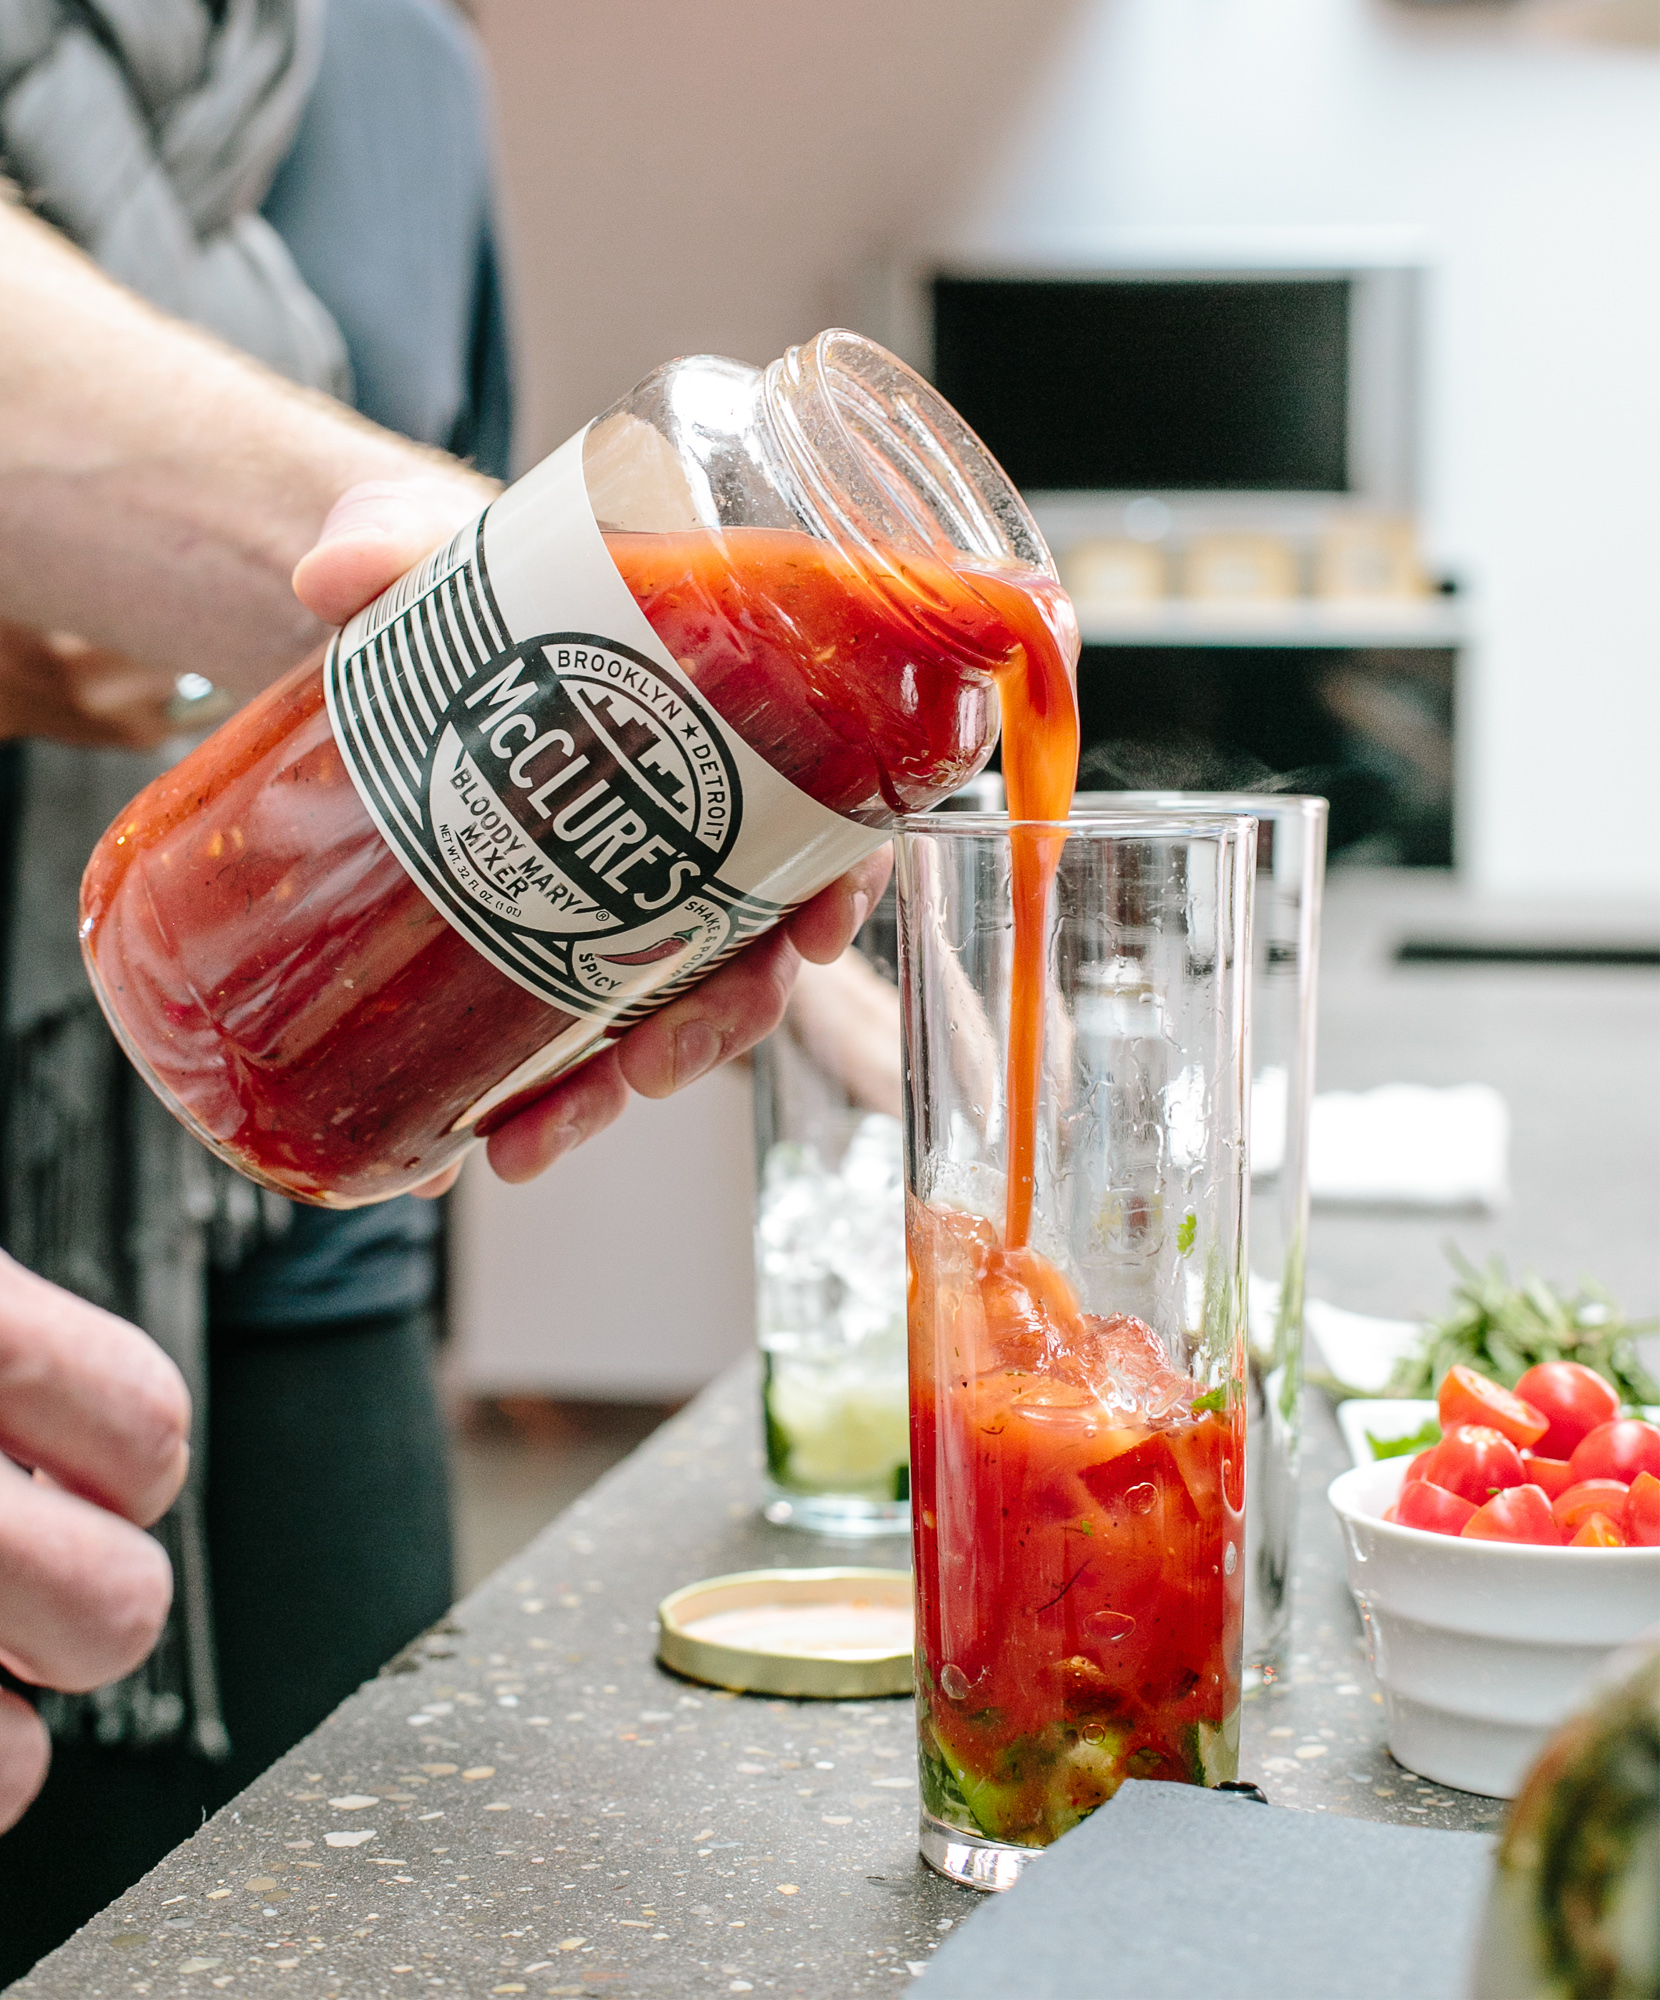 Simple Evening Detroit: The Bloody Marys | The Fresh Exchange